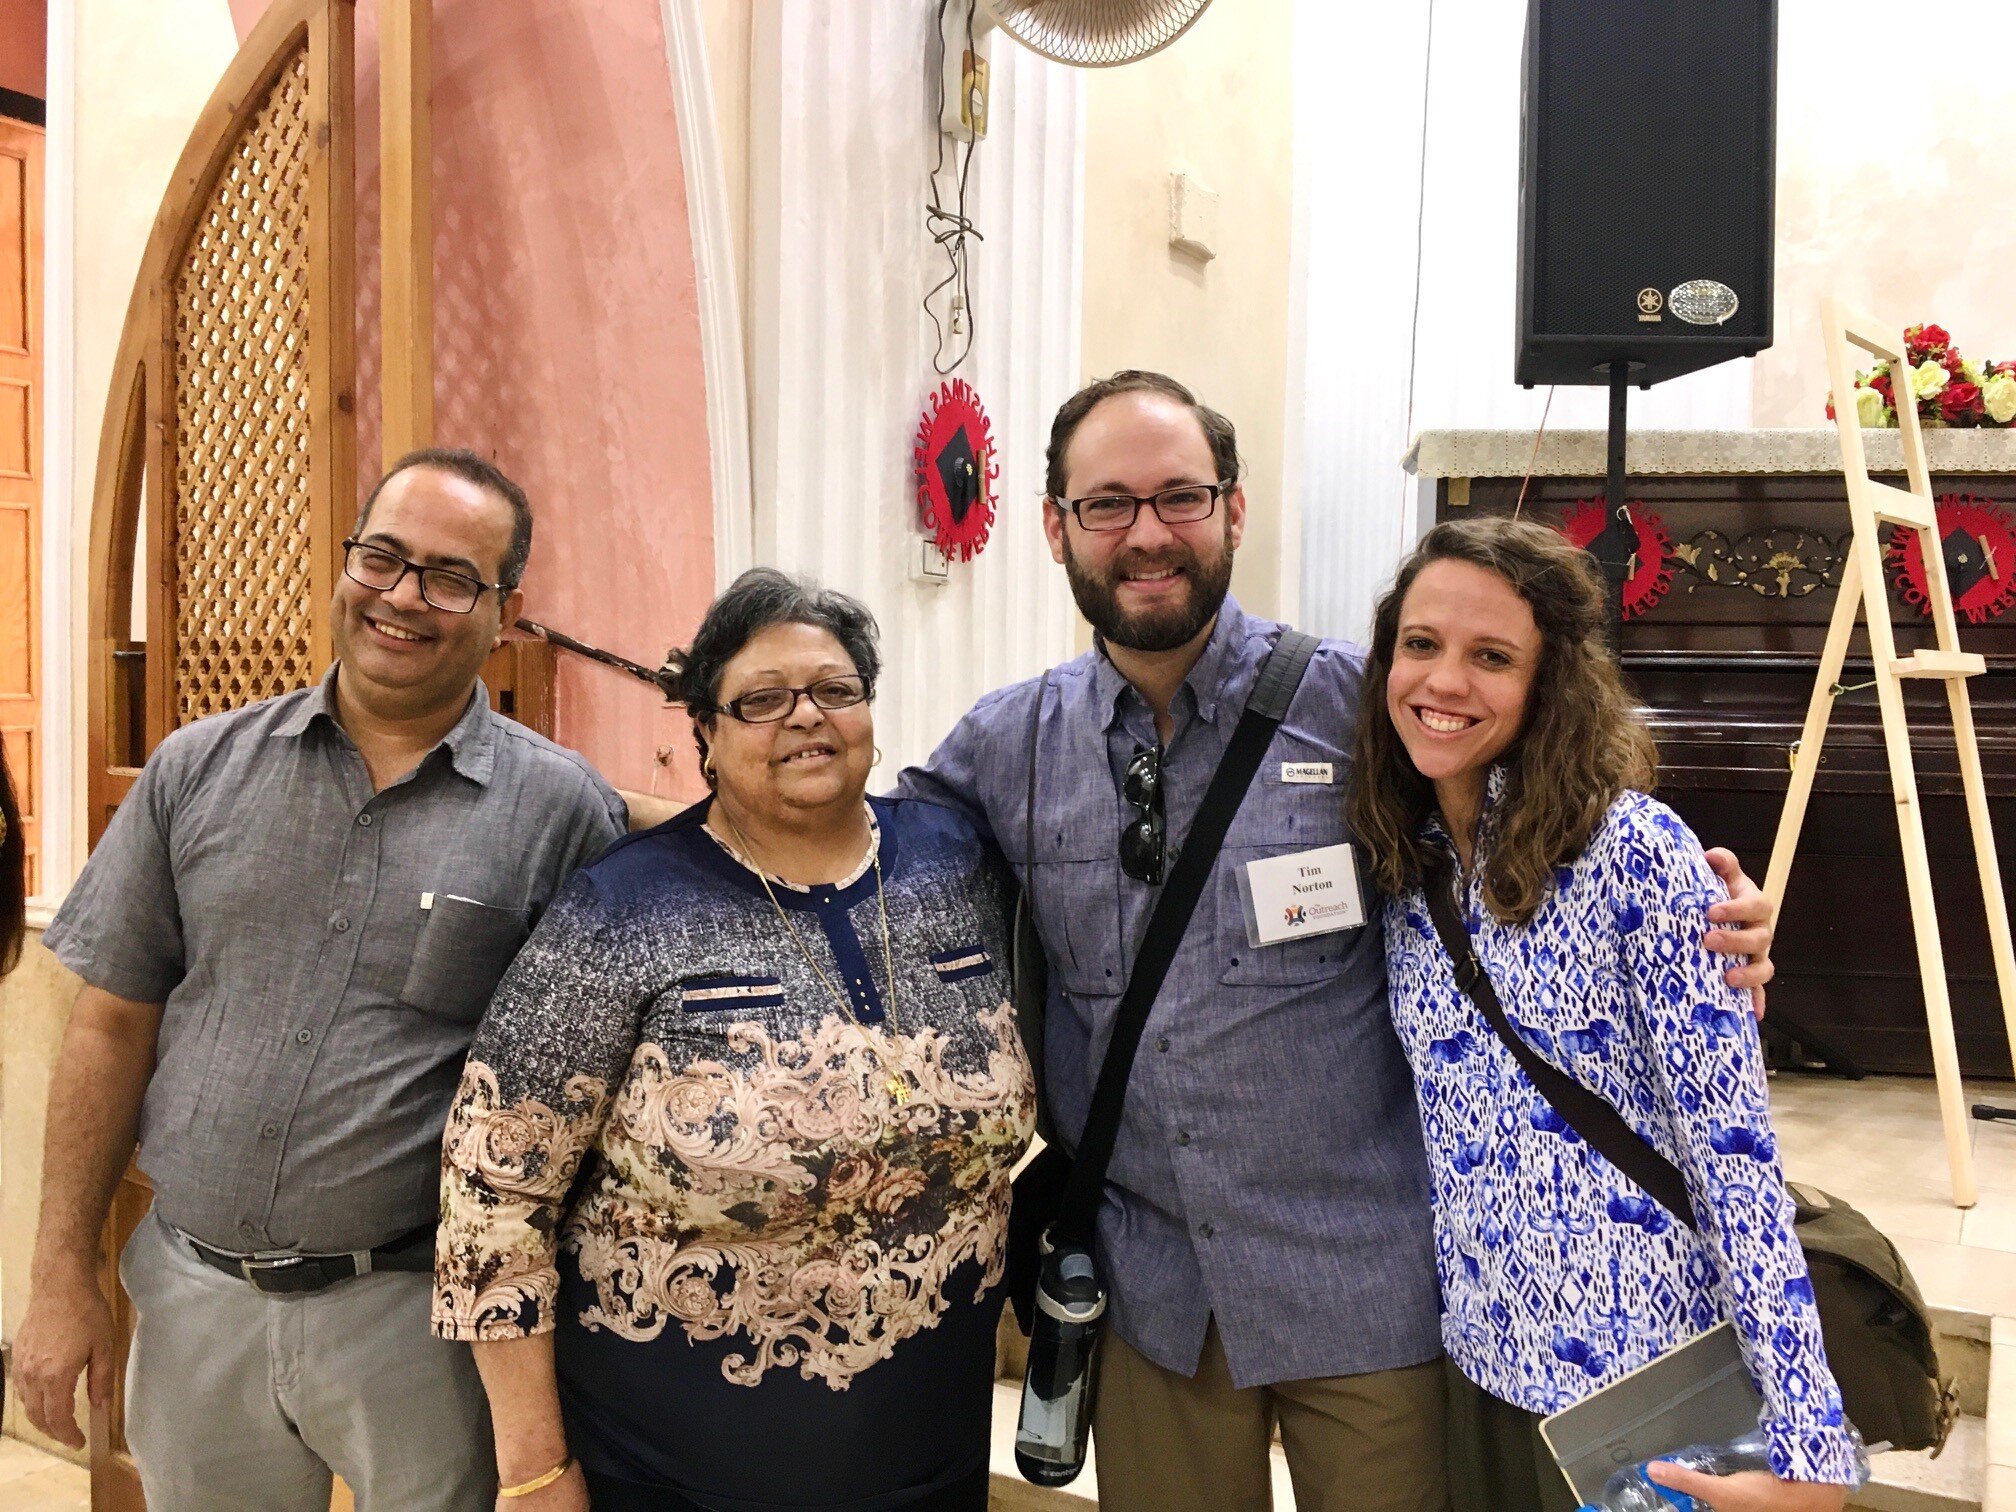  Our visit to the Synod of the Nile schools, located down the street from the Presbyterian Church of Luxor. Left to right: Rev. Mahrous Karam, the headmistress of the school, and Tim and Kendra Norton. 